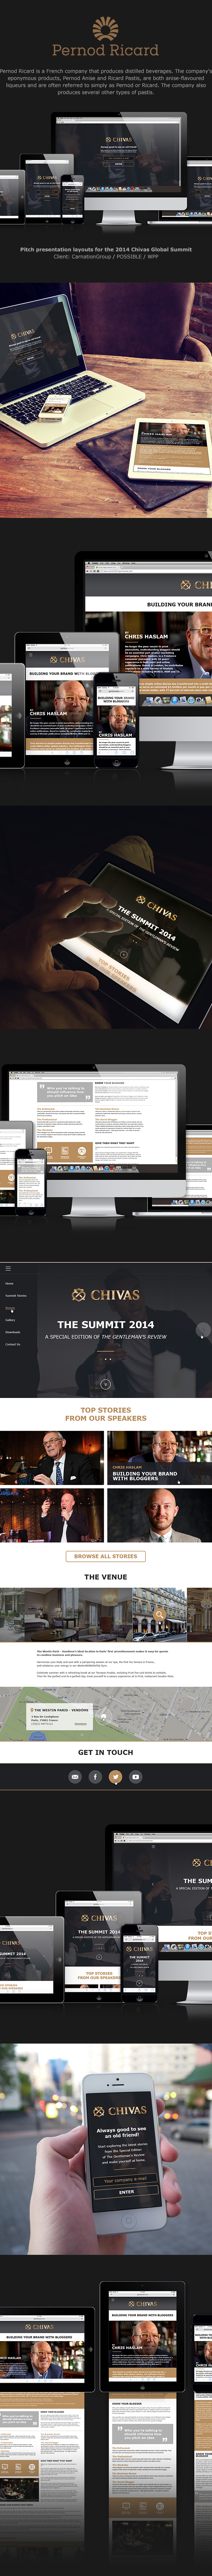 Website Layout UI ux chivas carnation WPP possible pitch wireframe Responsive internal